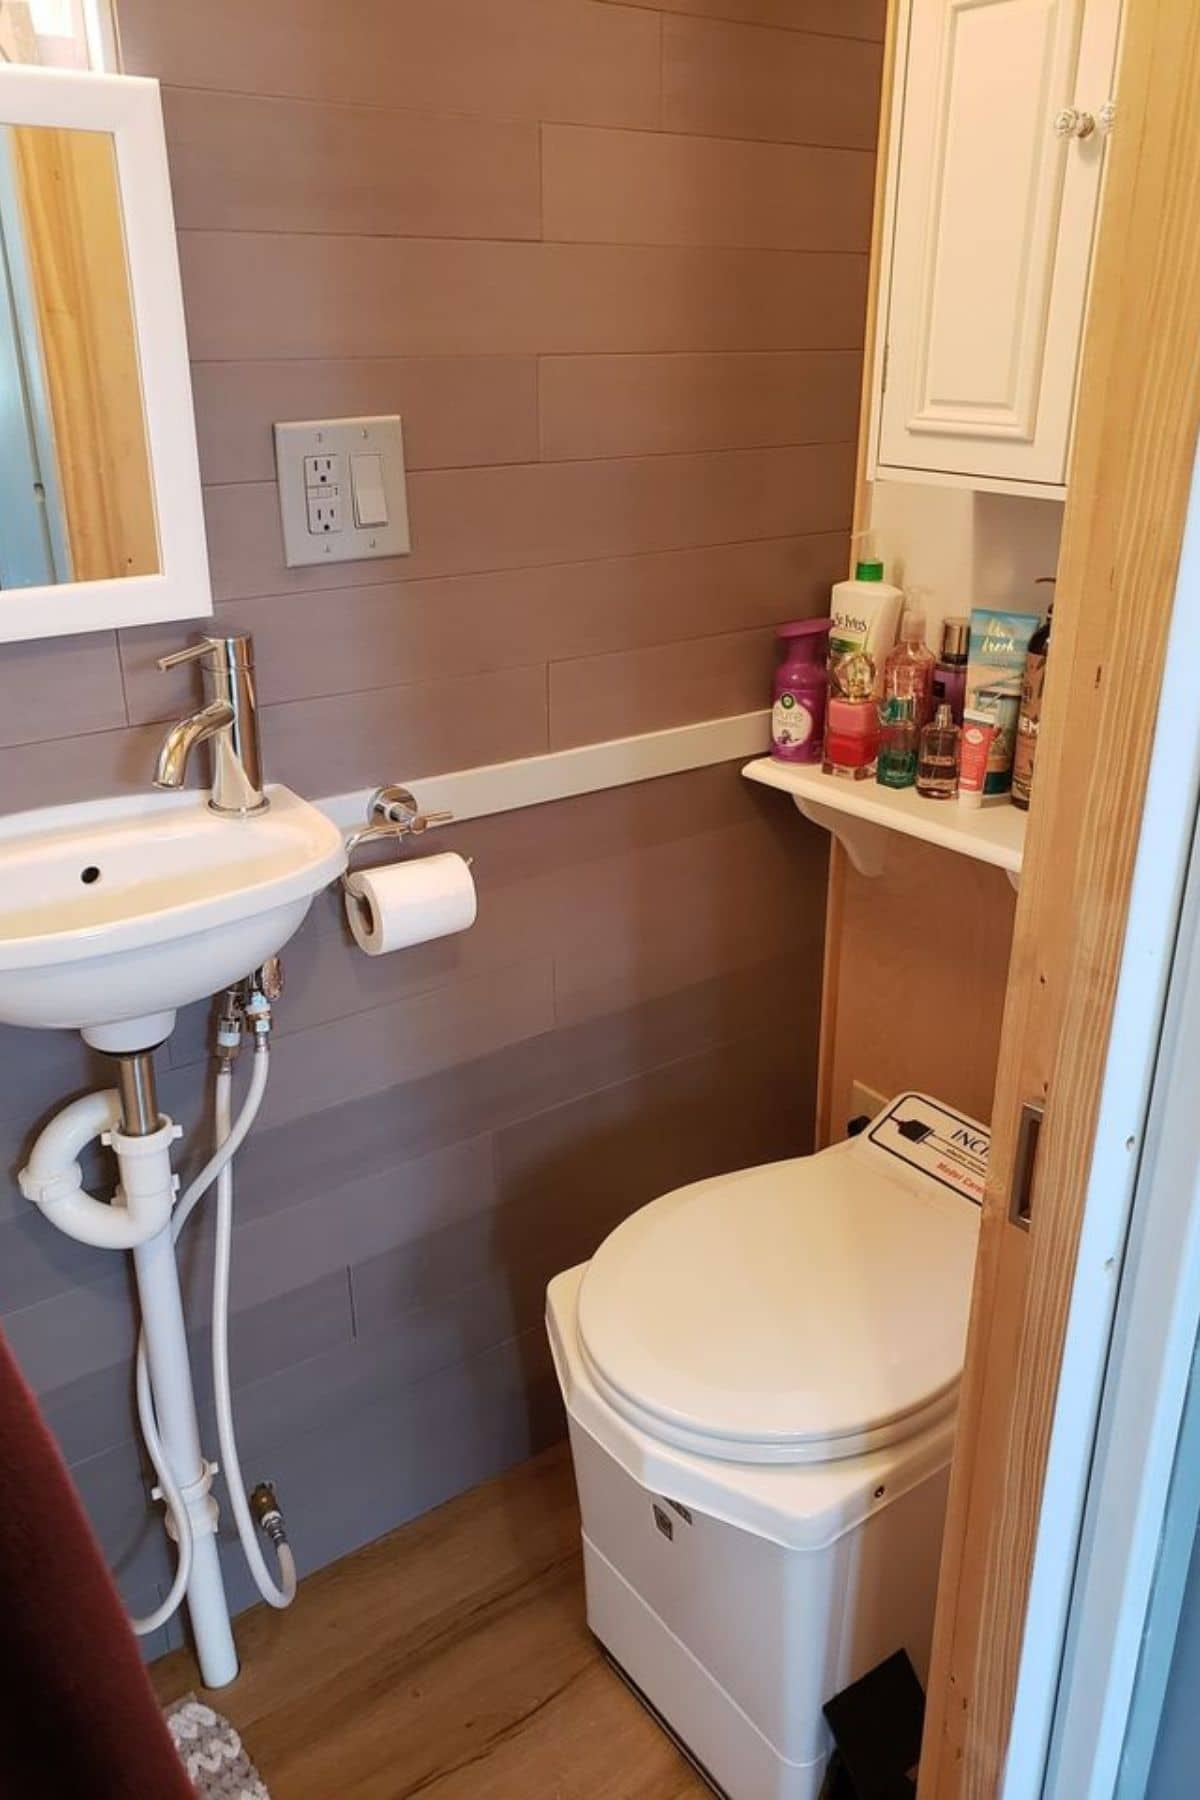 Brown walls in bathroom with hanging sink and incinerator toilet against wall